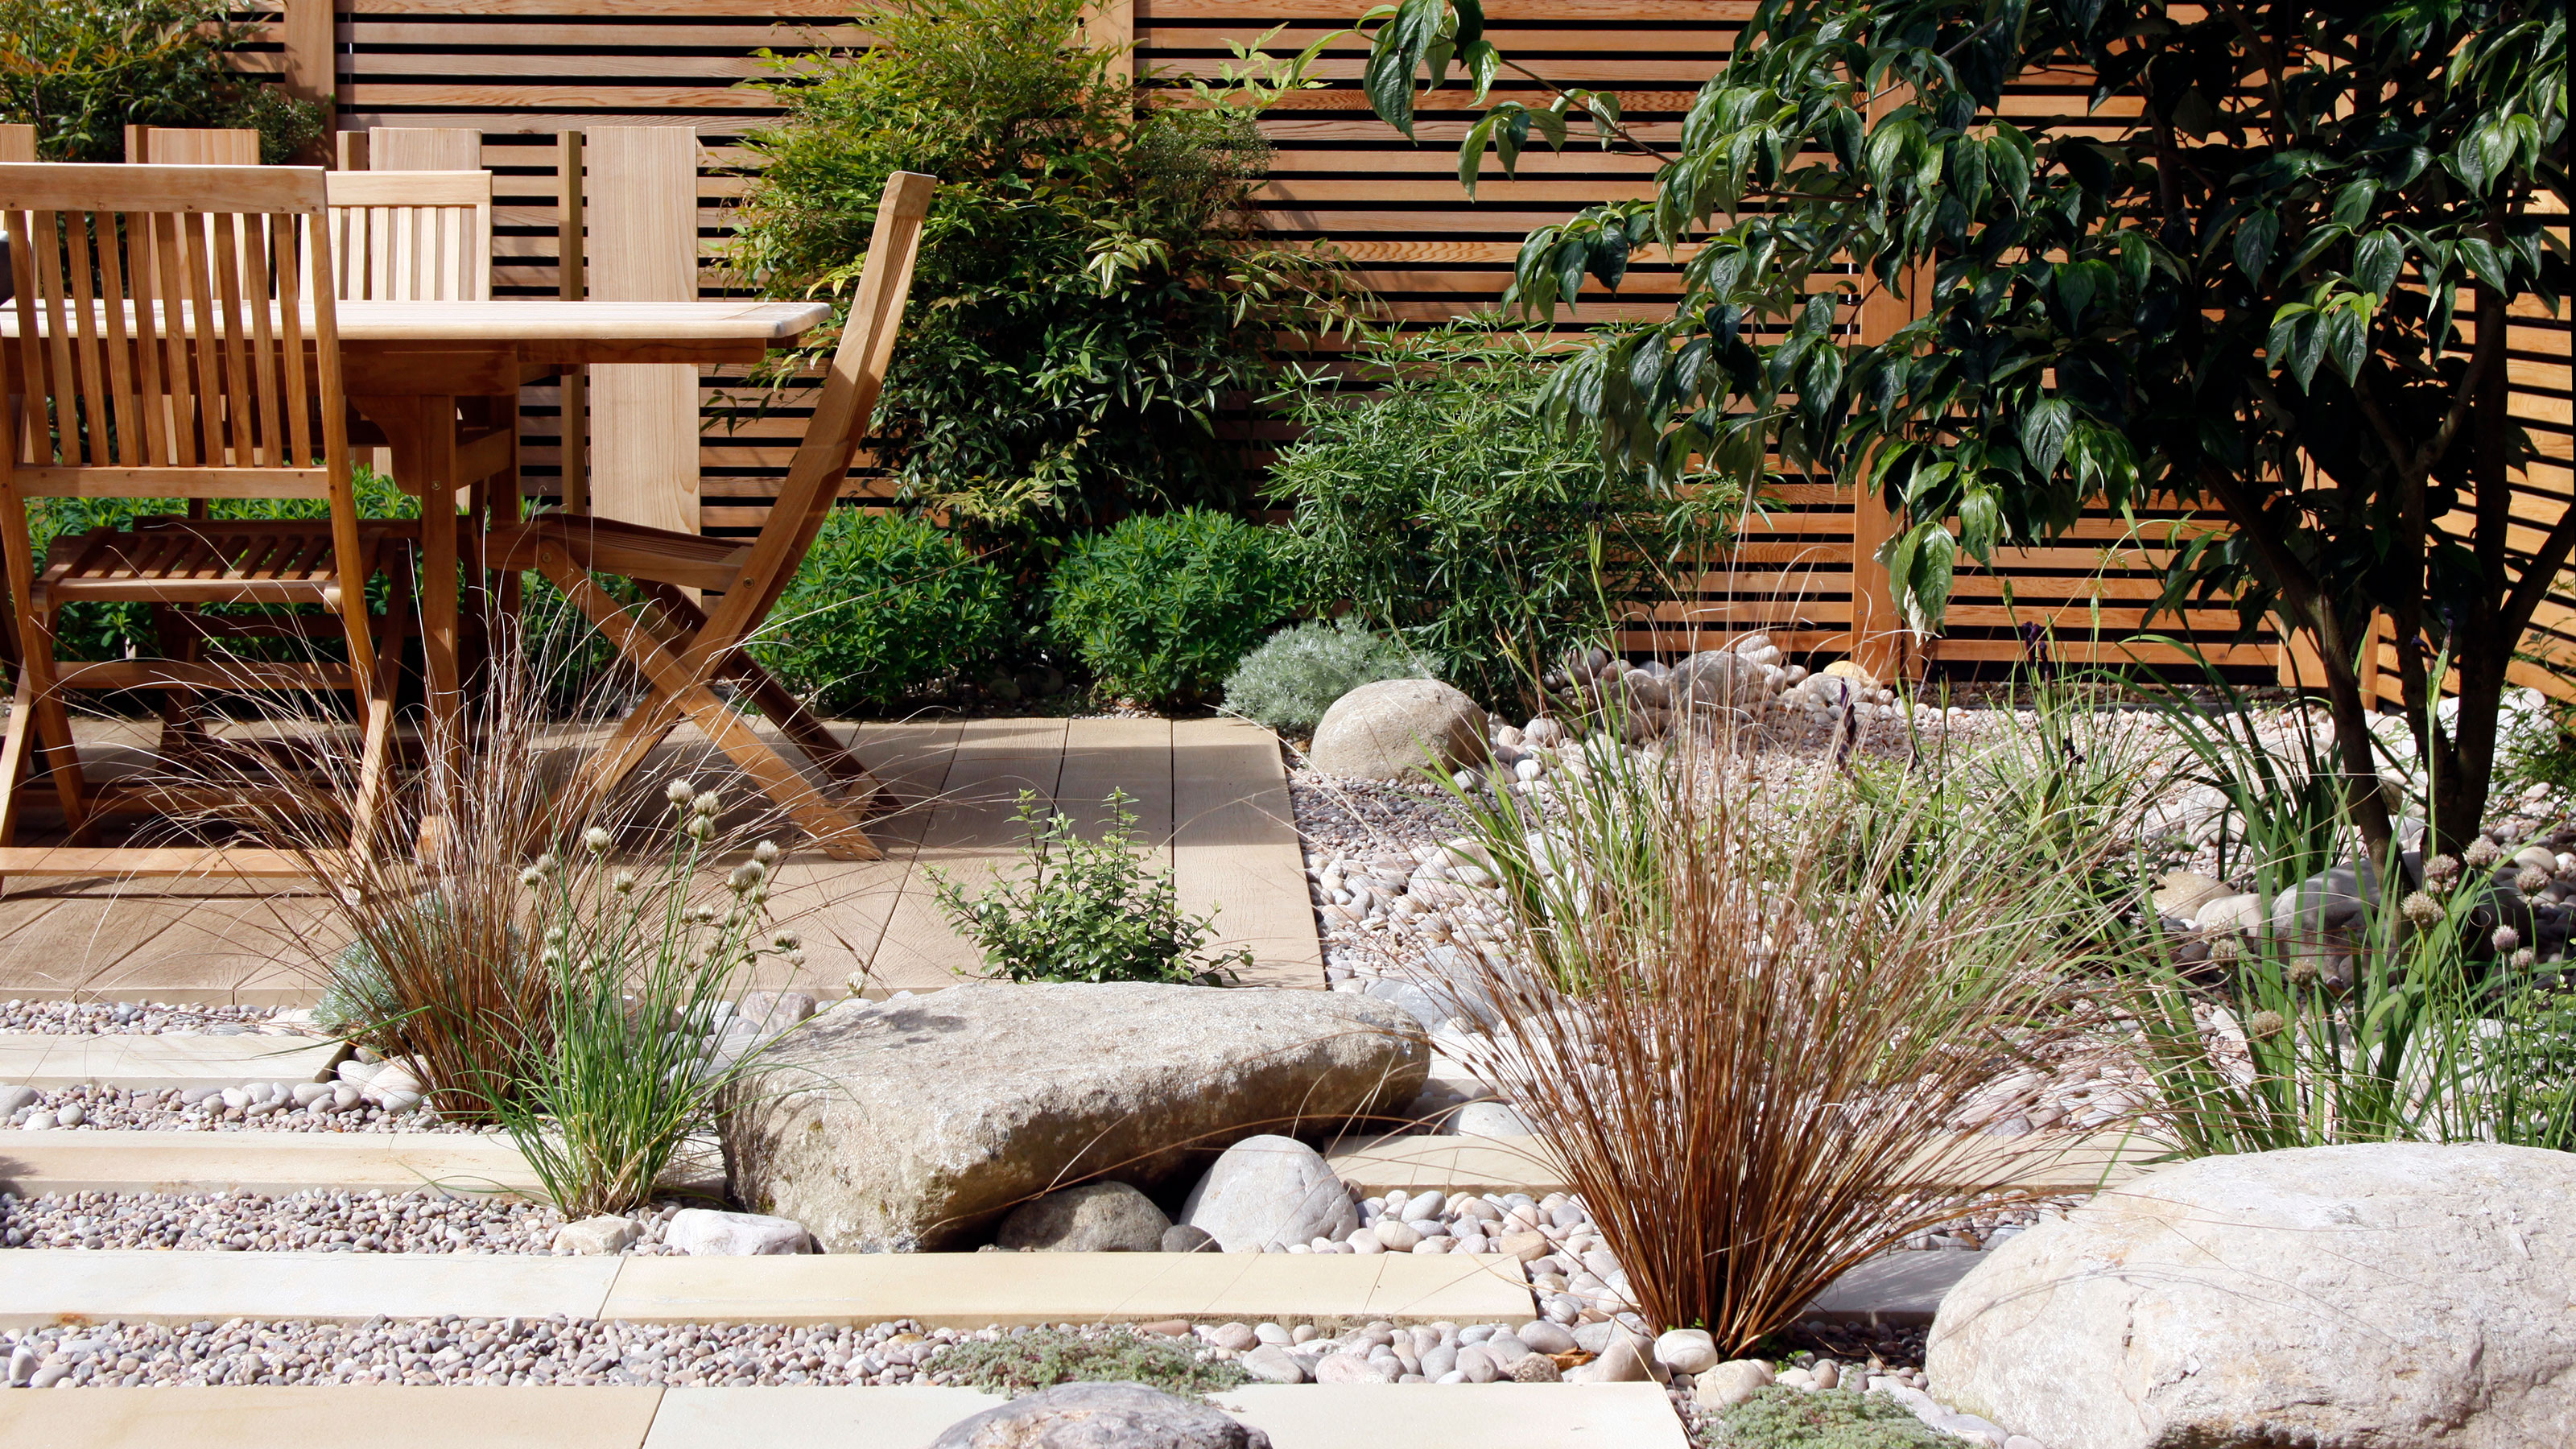 10 Tricks For Landscaping With Boulders | Gardeningetc